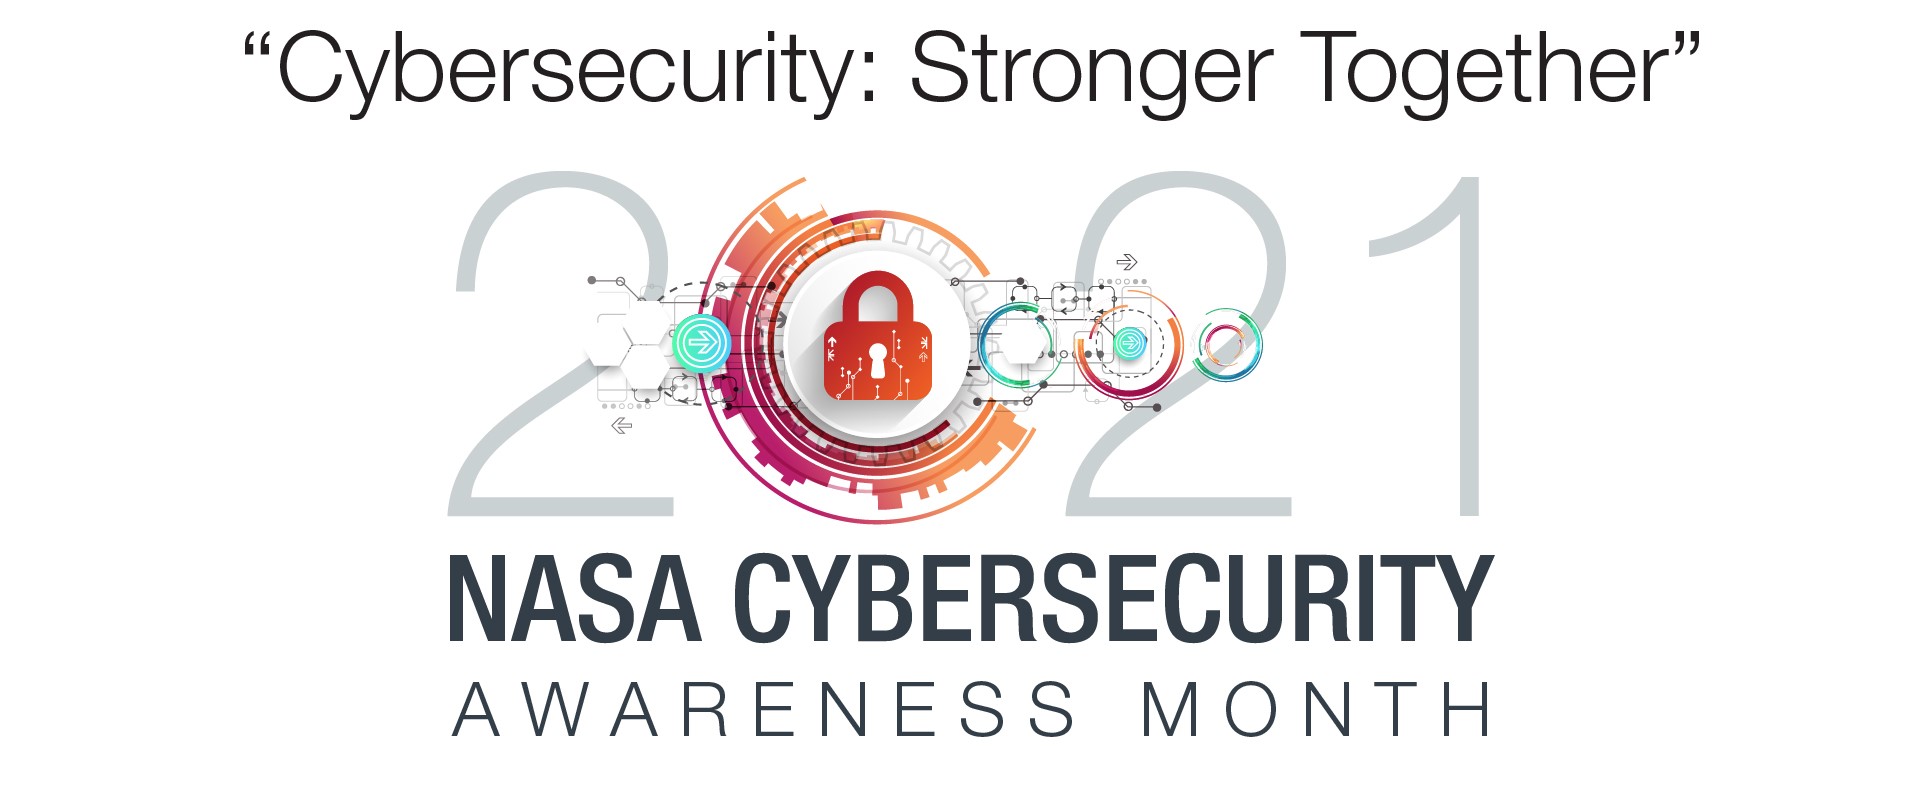 NASA Cybersecurity Awareness Month graphic.